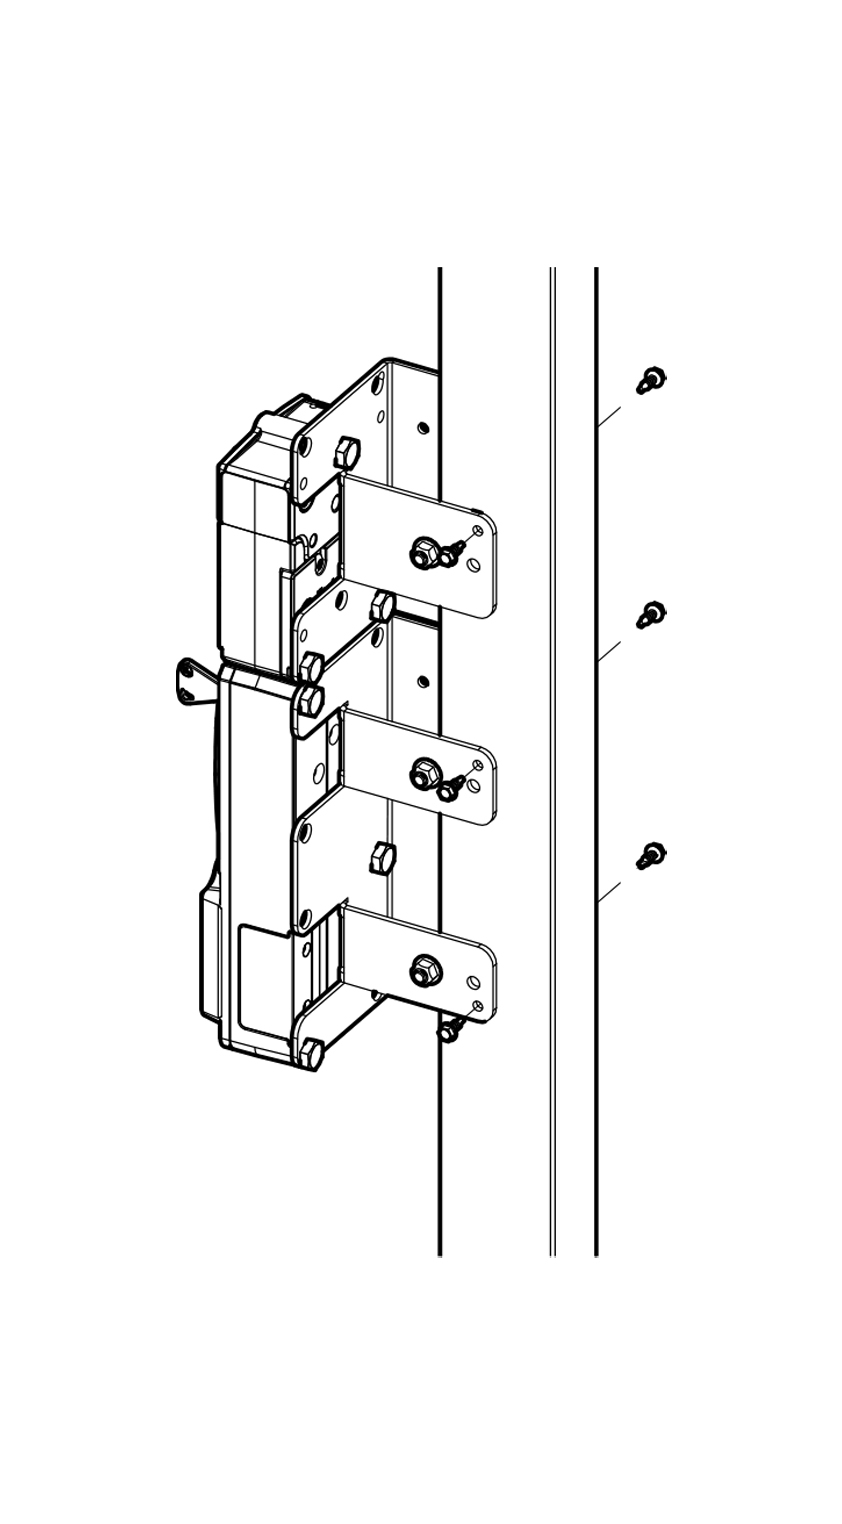 troax mounting brackets for safety switches